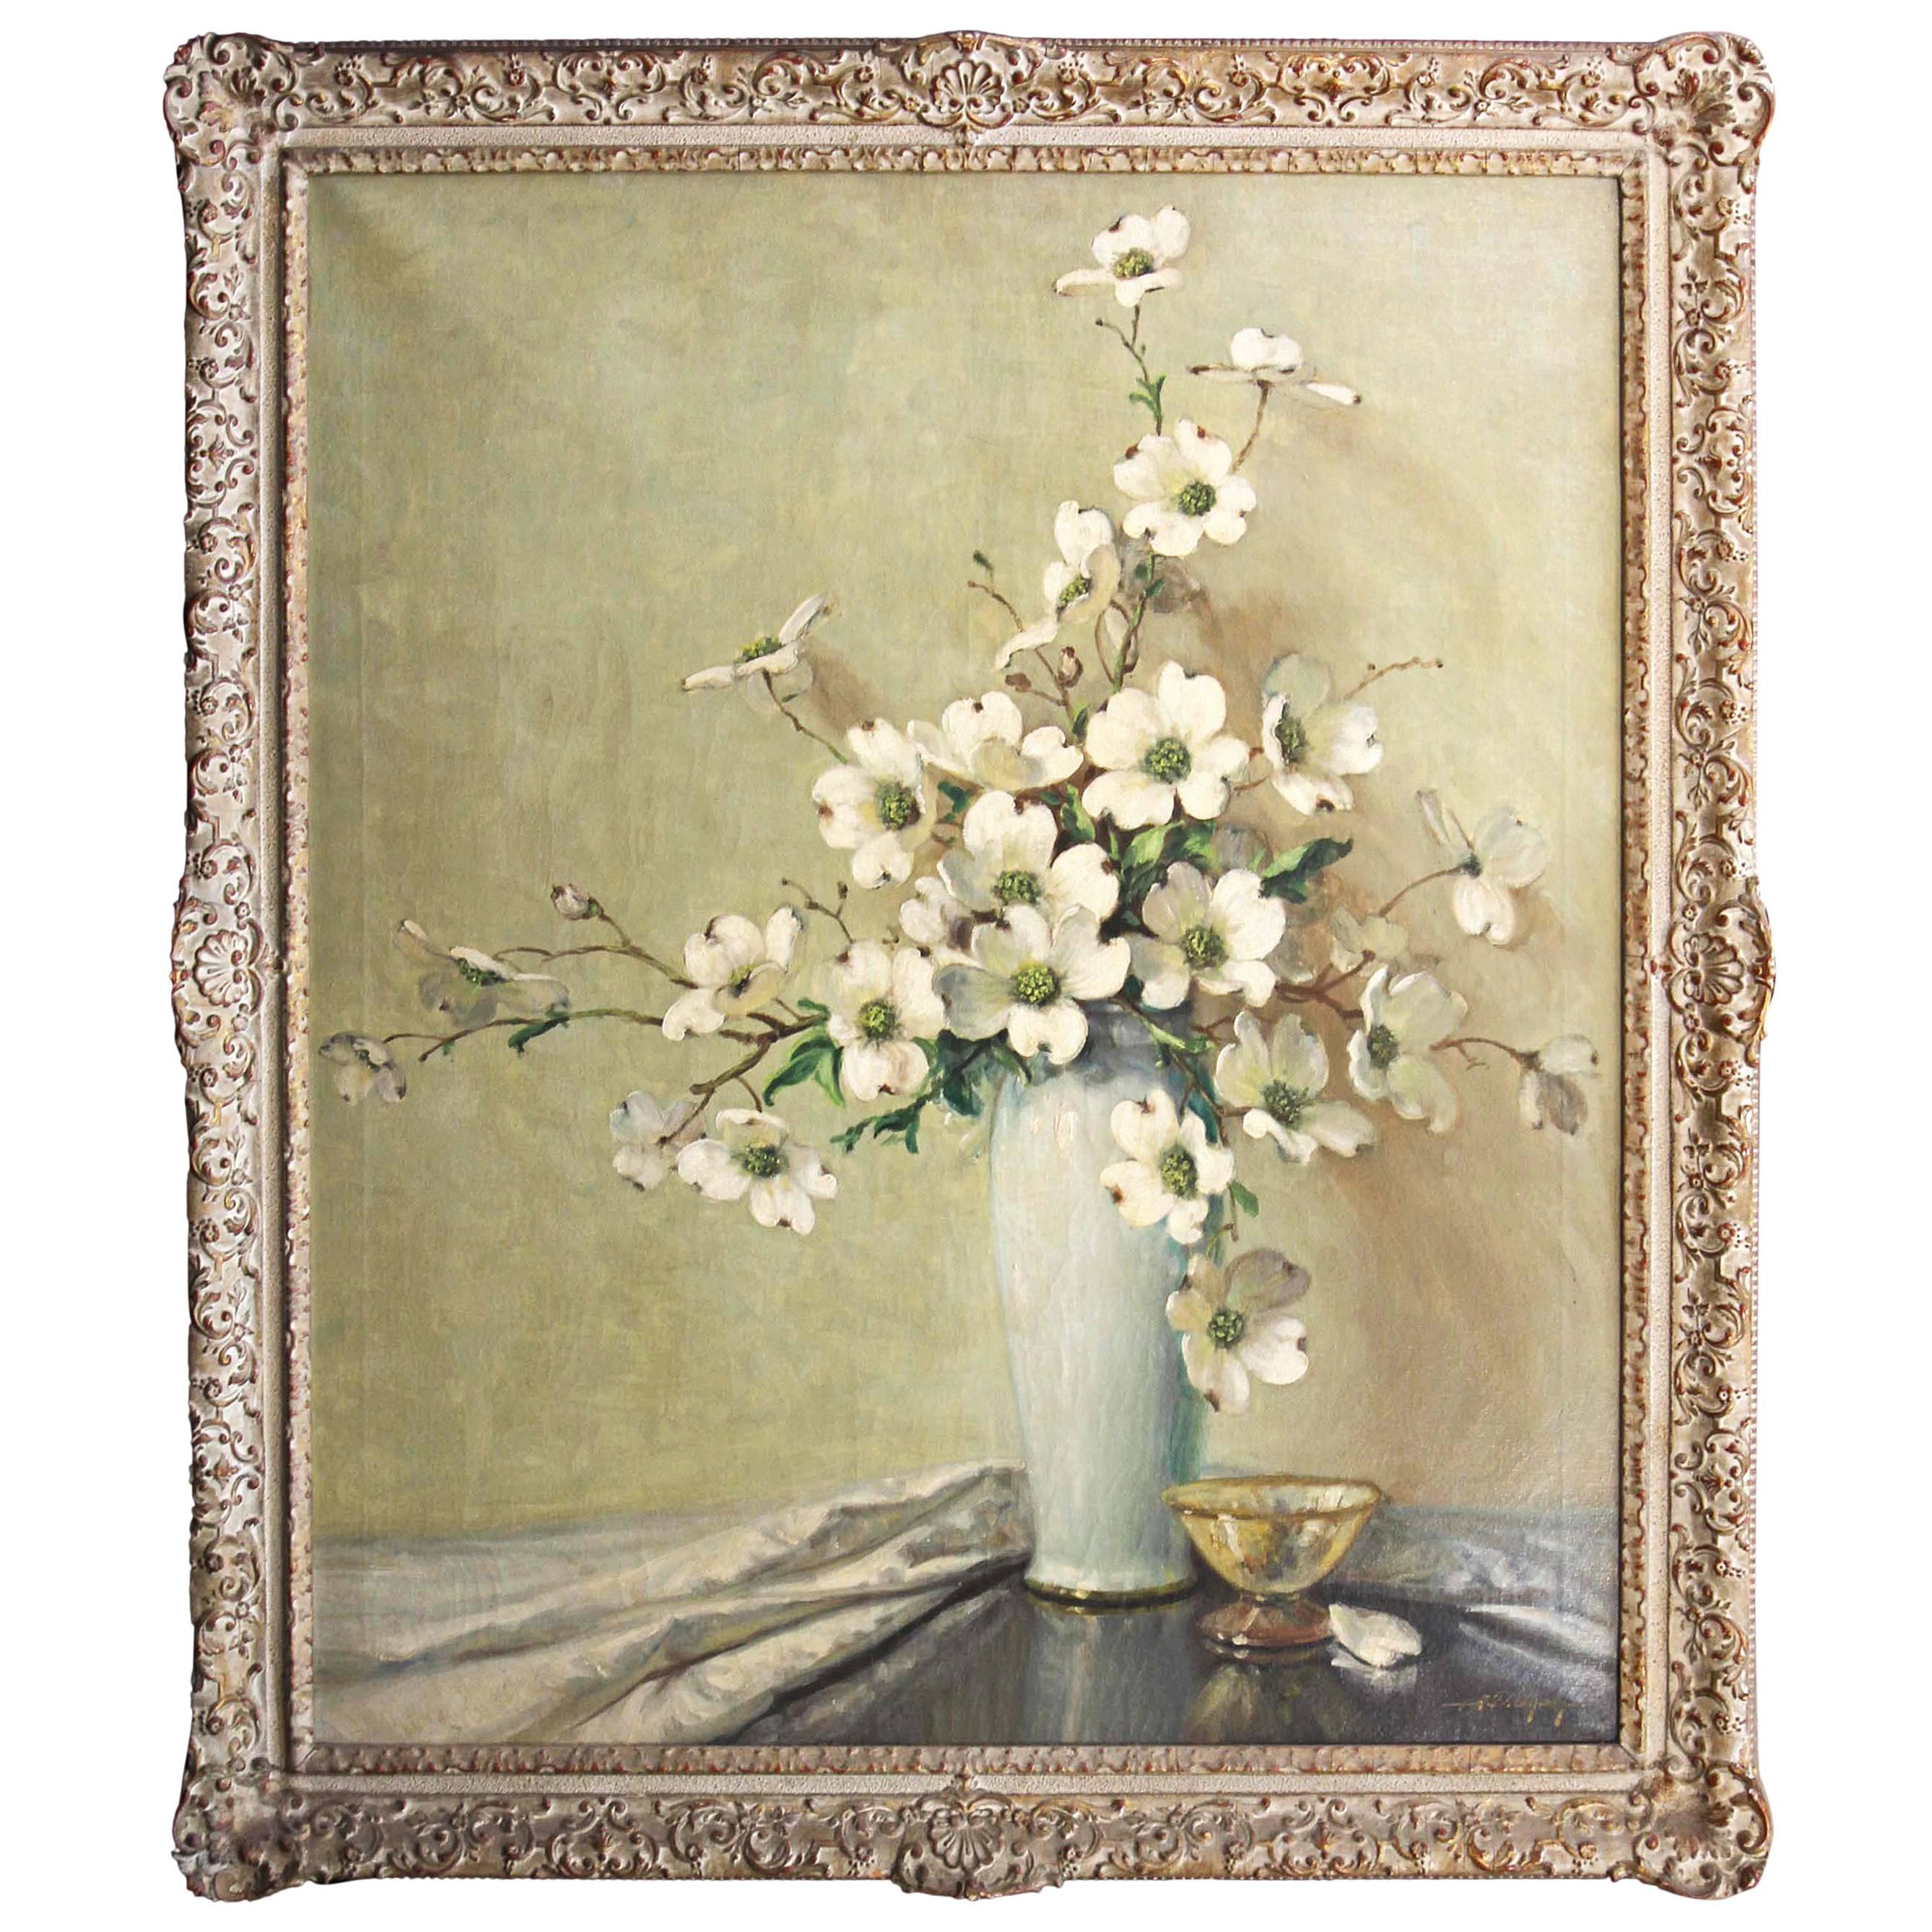 Impressionist Floral Still Life, Dogwood Blossoms by A. D. Greer 